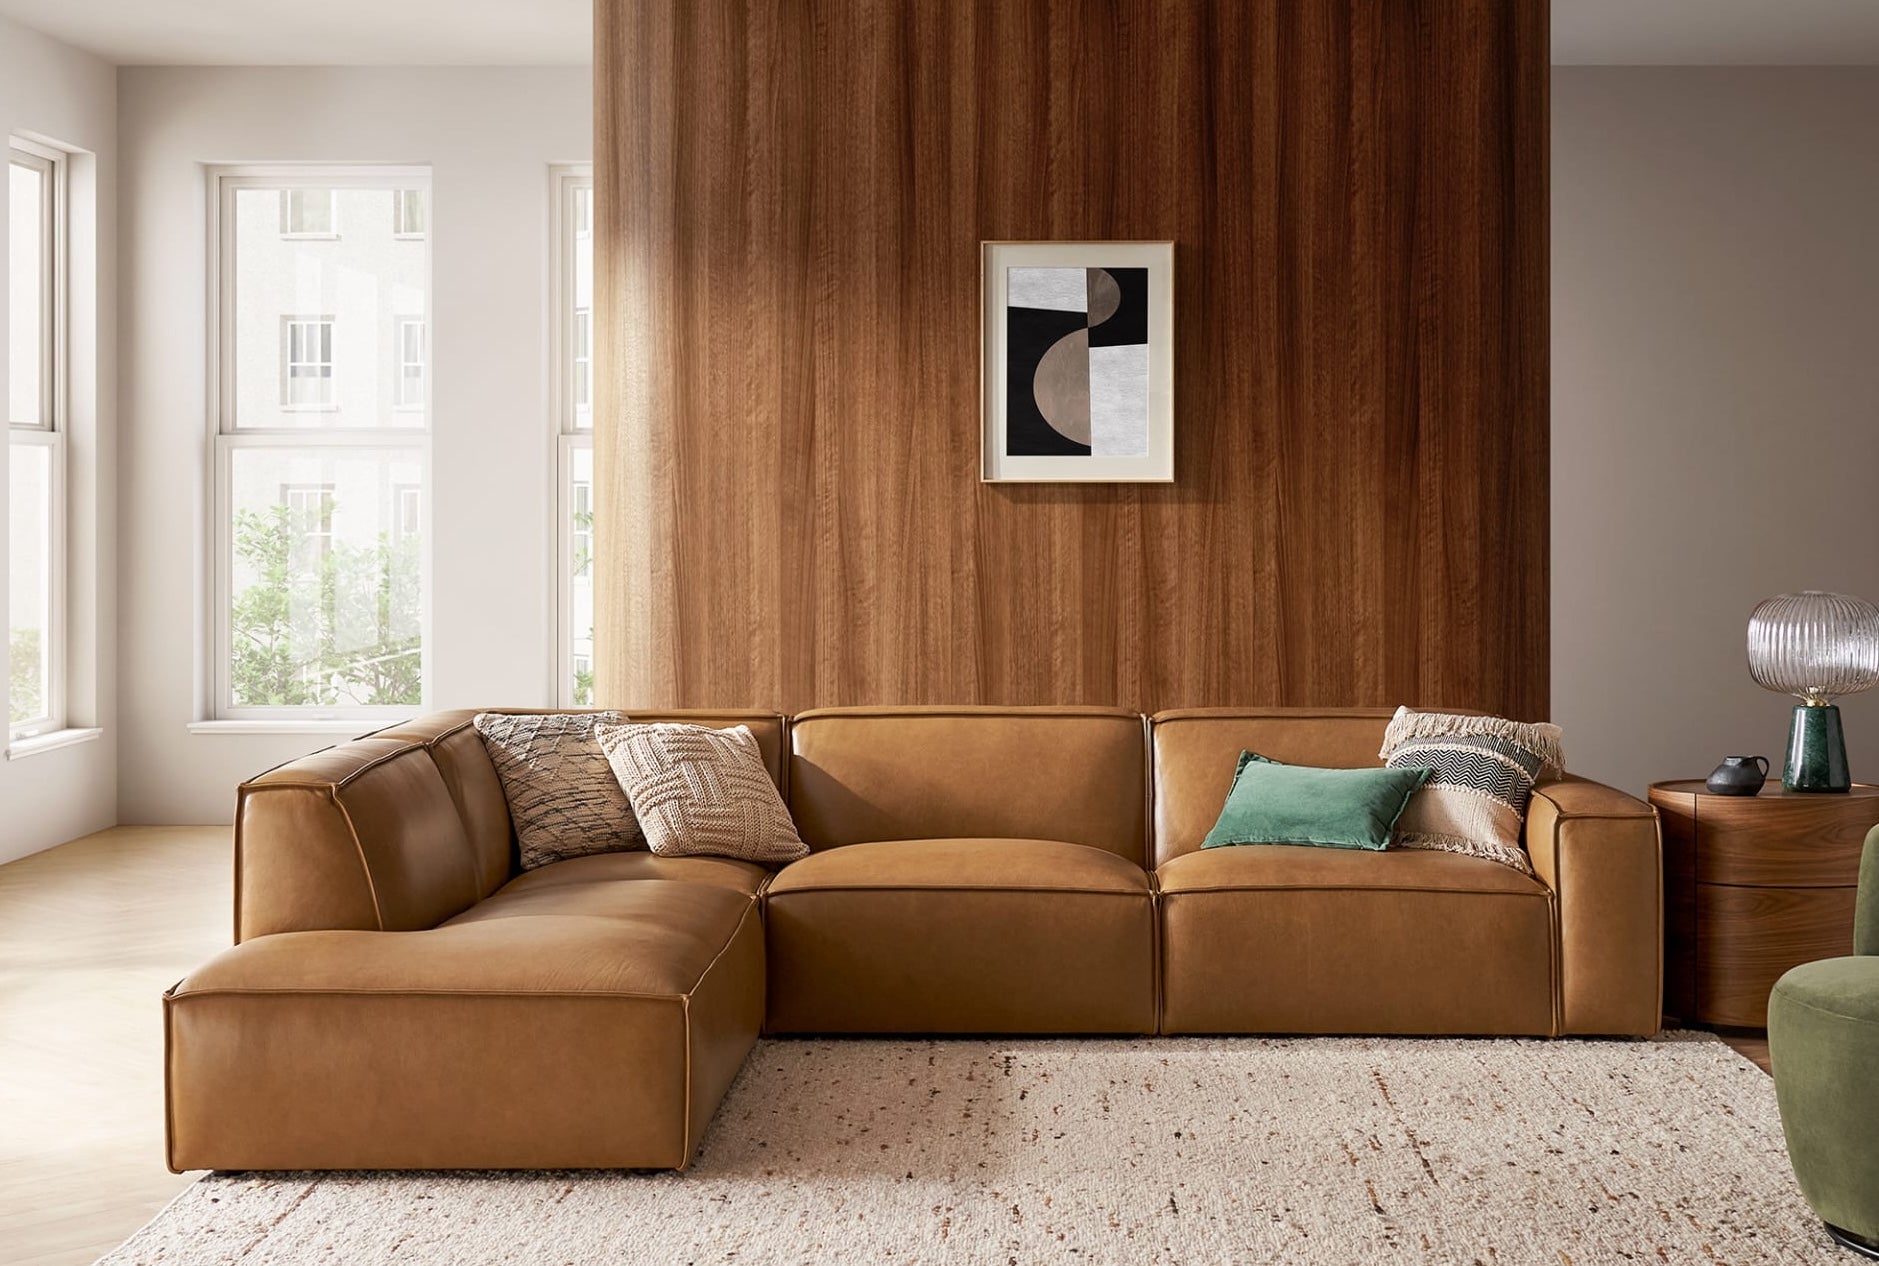 A modern living room with a brown leather sectional sofa adorned with assorted pillows in beige, green, and brown. The backdrop boasts a wooden panel wall with abstract art. Sunlight streams in from large windows, illuminating the beige rug and light wood floors.